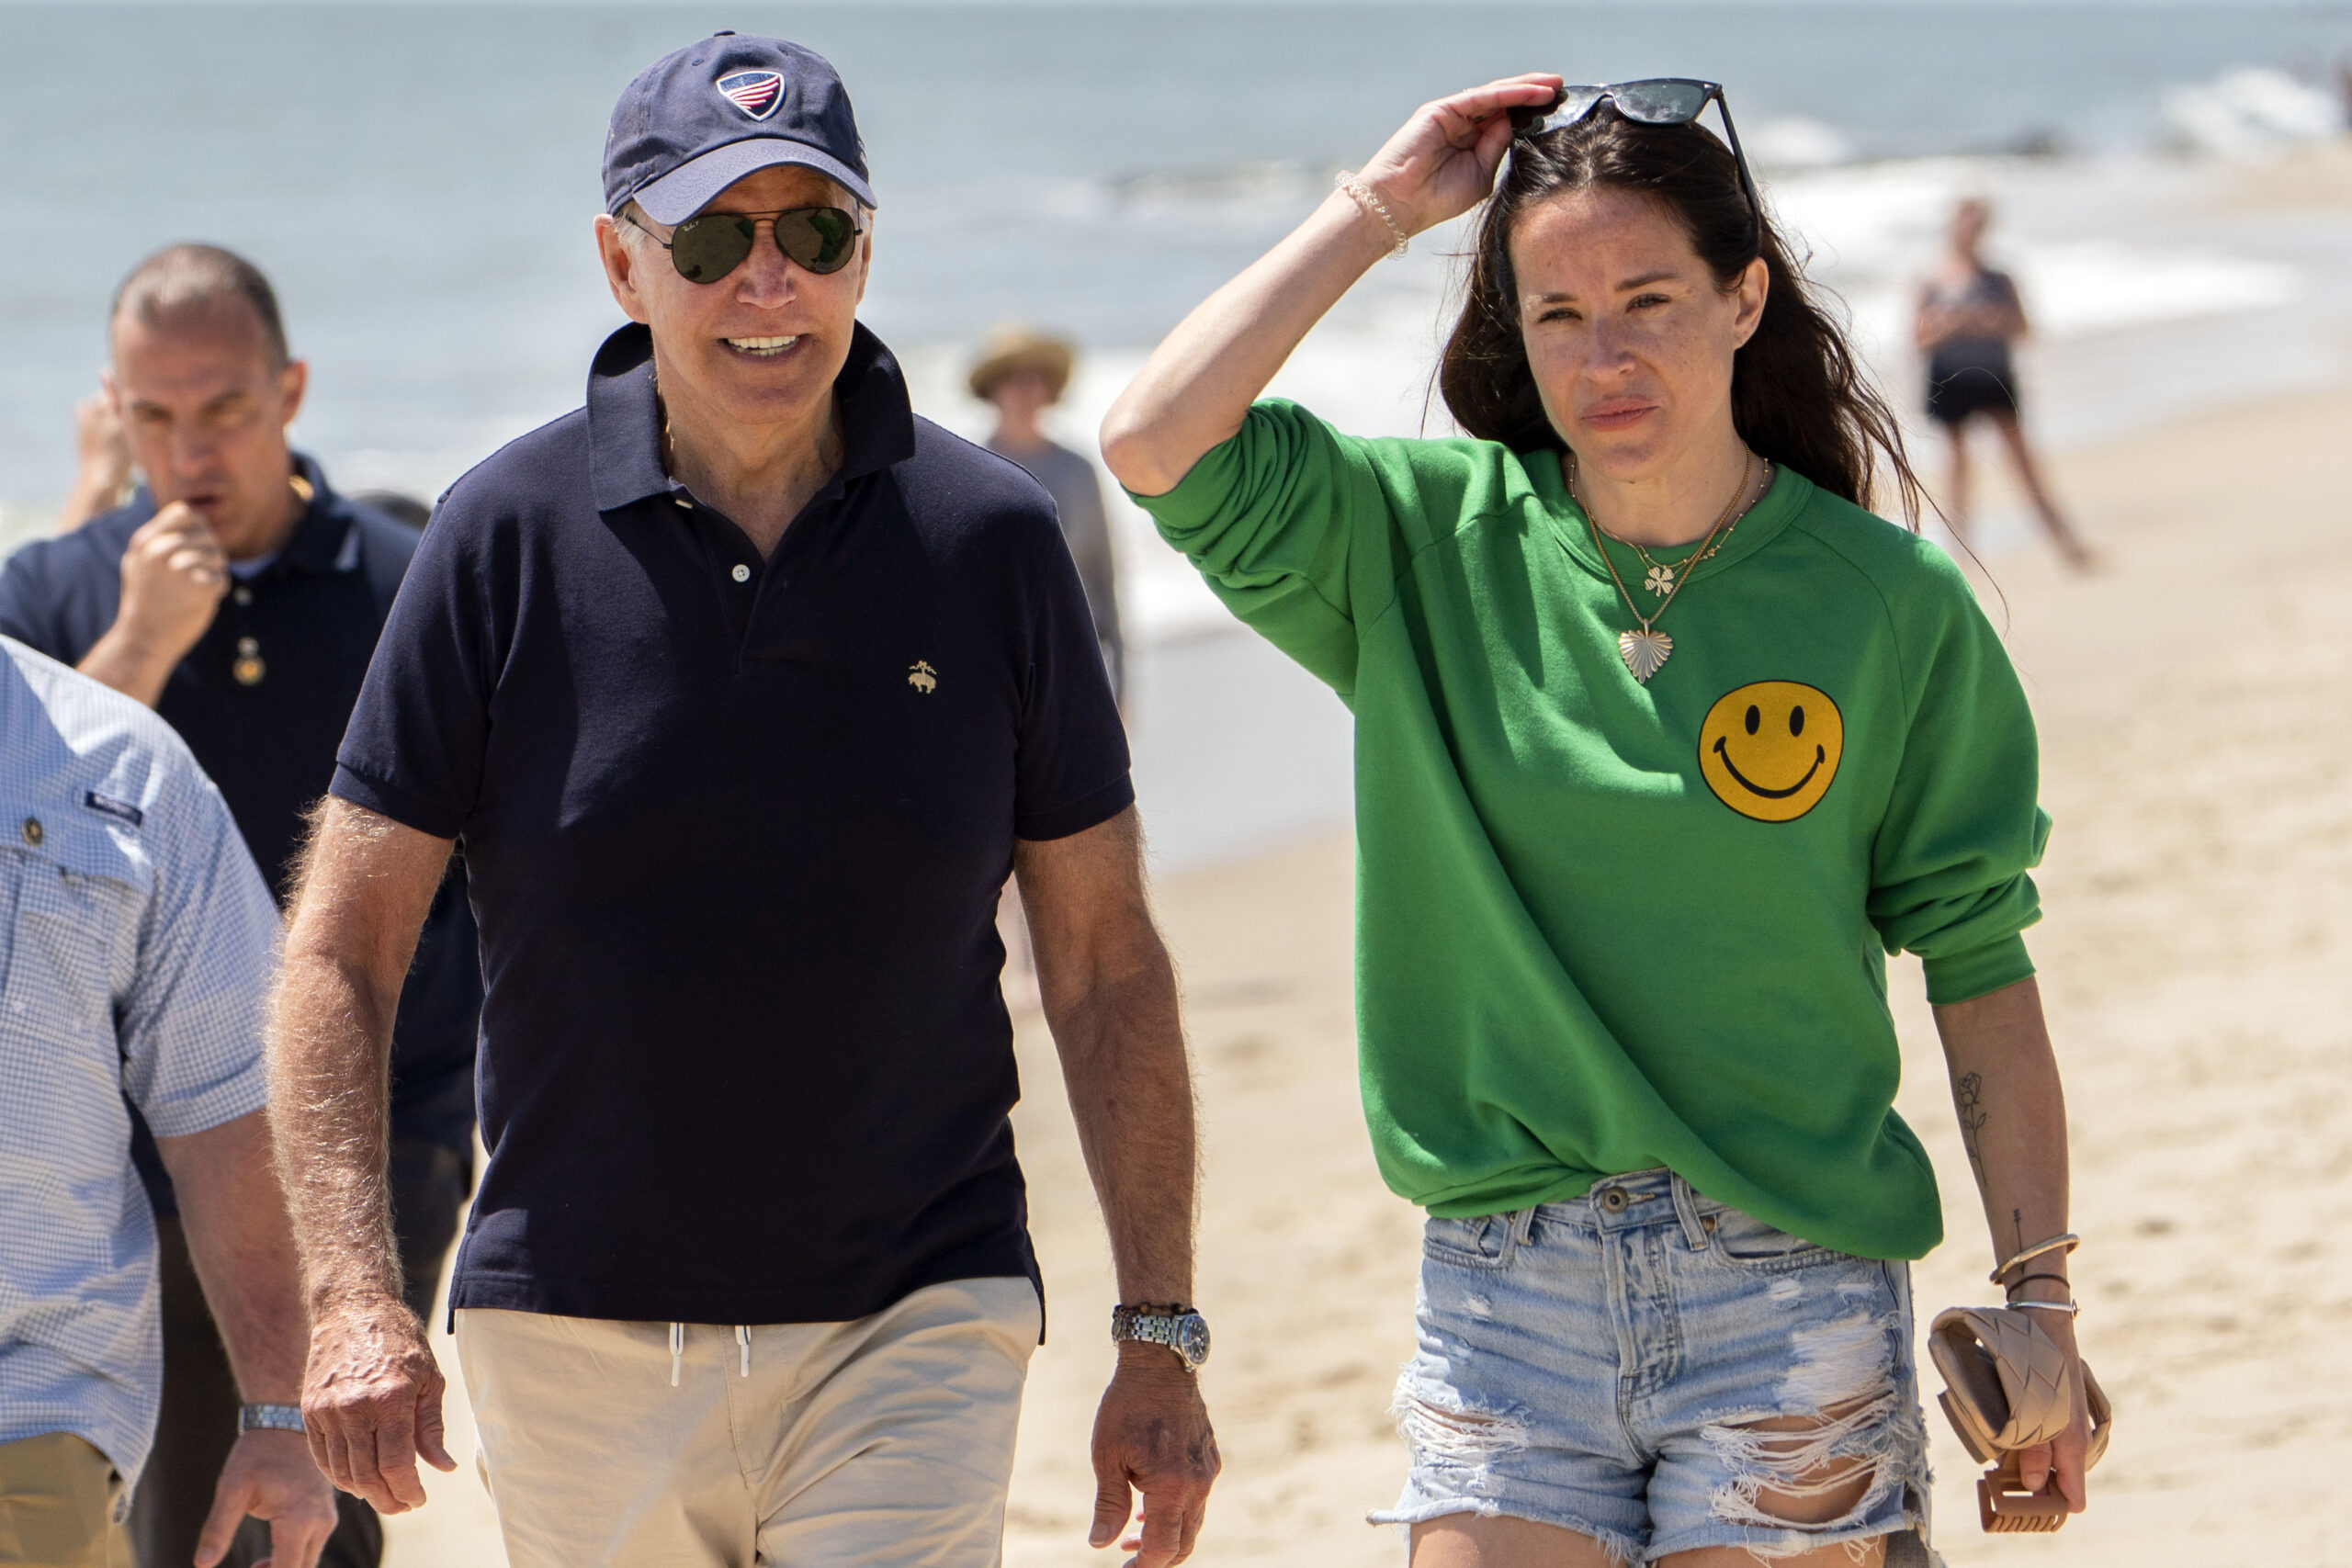 President Joe Biden walks on the beach with daughter Ashley Biden, June 20, 2022, in Rehoboth Beach, Del. Criminal prosecutors may soon get to see over 900 documents pertaining to the alleged theft of a diary belonging to Ashley Biden, after a judge on Thursday, Dec. 21, 2023, rejected a First Amendment claim by the conservative group Project Veritas.Photo: Manuel Balce Ceneta/AP